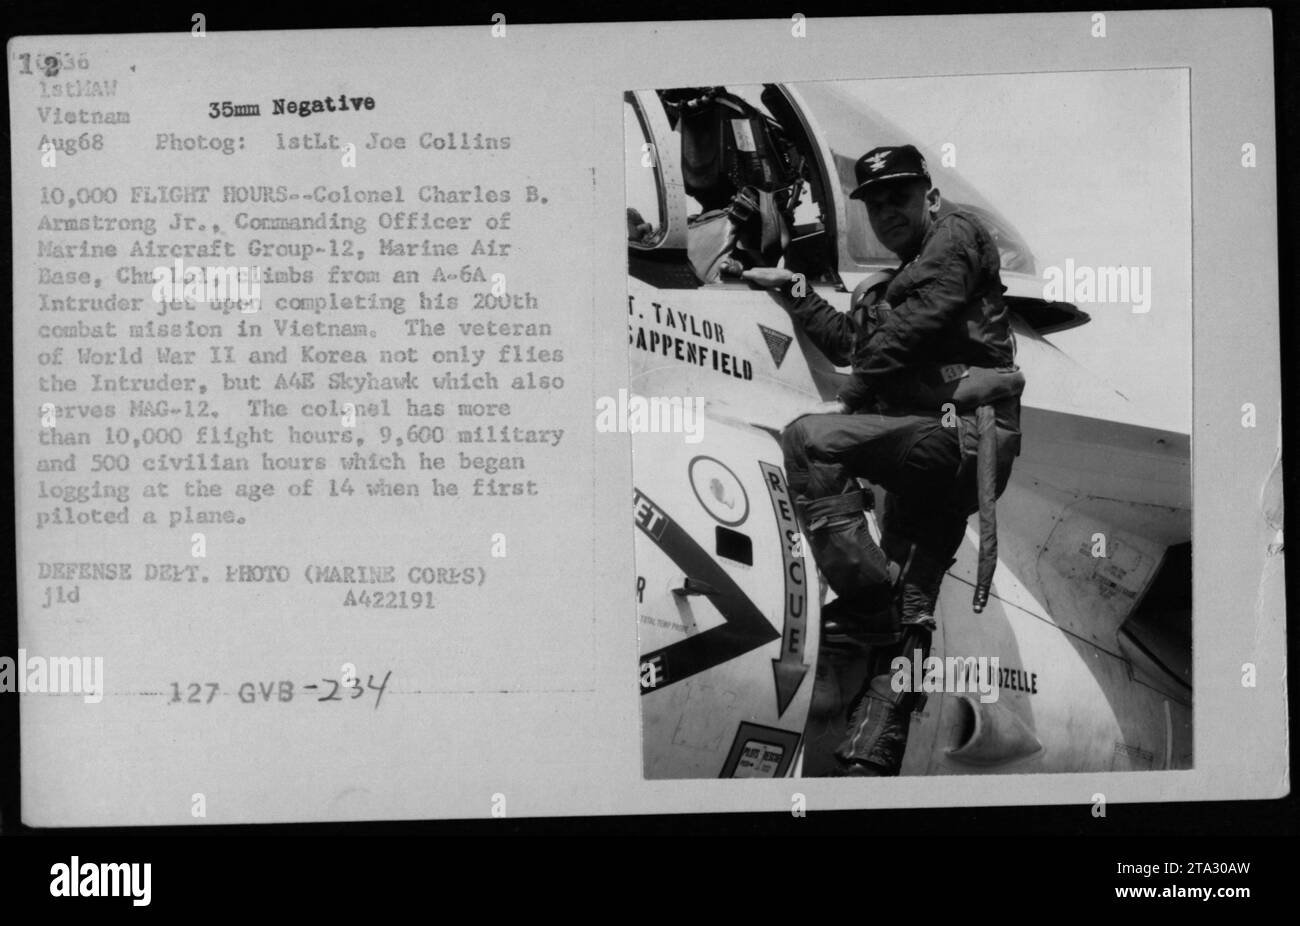 Colonel Charles B. Armstrong Jr., Commanding Officer of Marine Aircraft Group-12, Marine Air Base, Chu Lai, is seen climbing out of his A-6A Intruder jet after completing his 200th combat mission in Vietnam. He is a veteran of World War II and Korea, with over 10,000 flight hours, both military and civilian. Photo taken in August 1968. Stock Photo